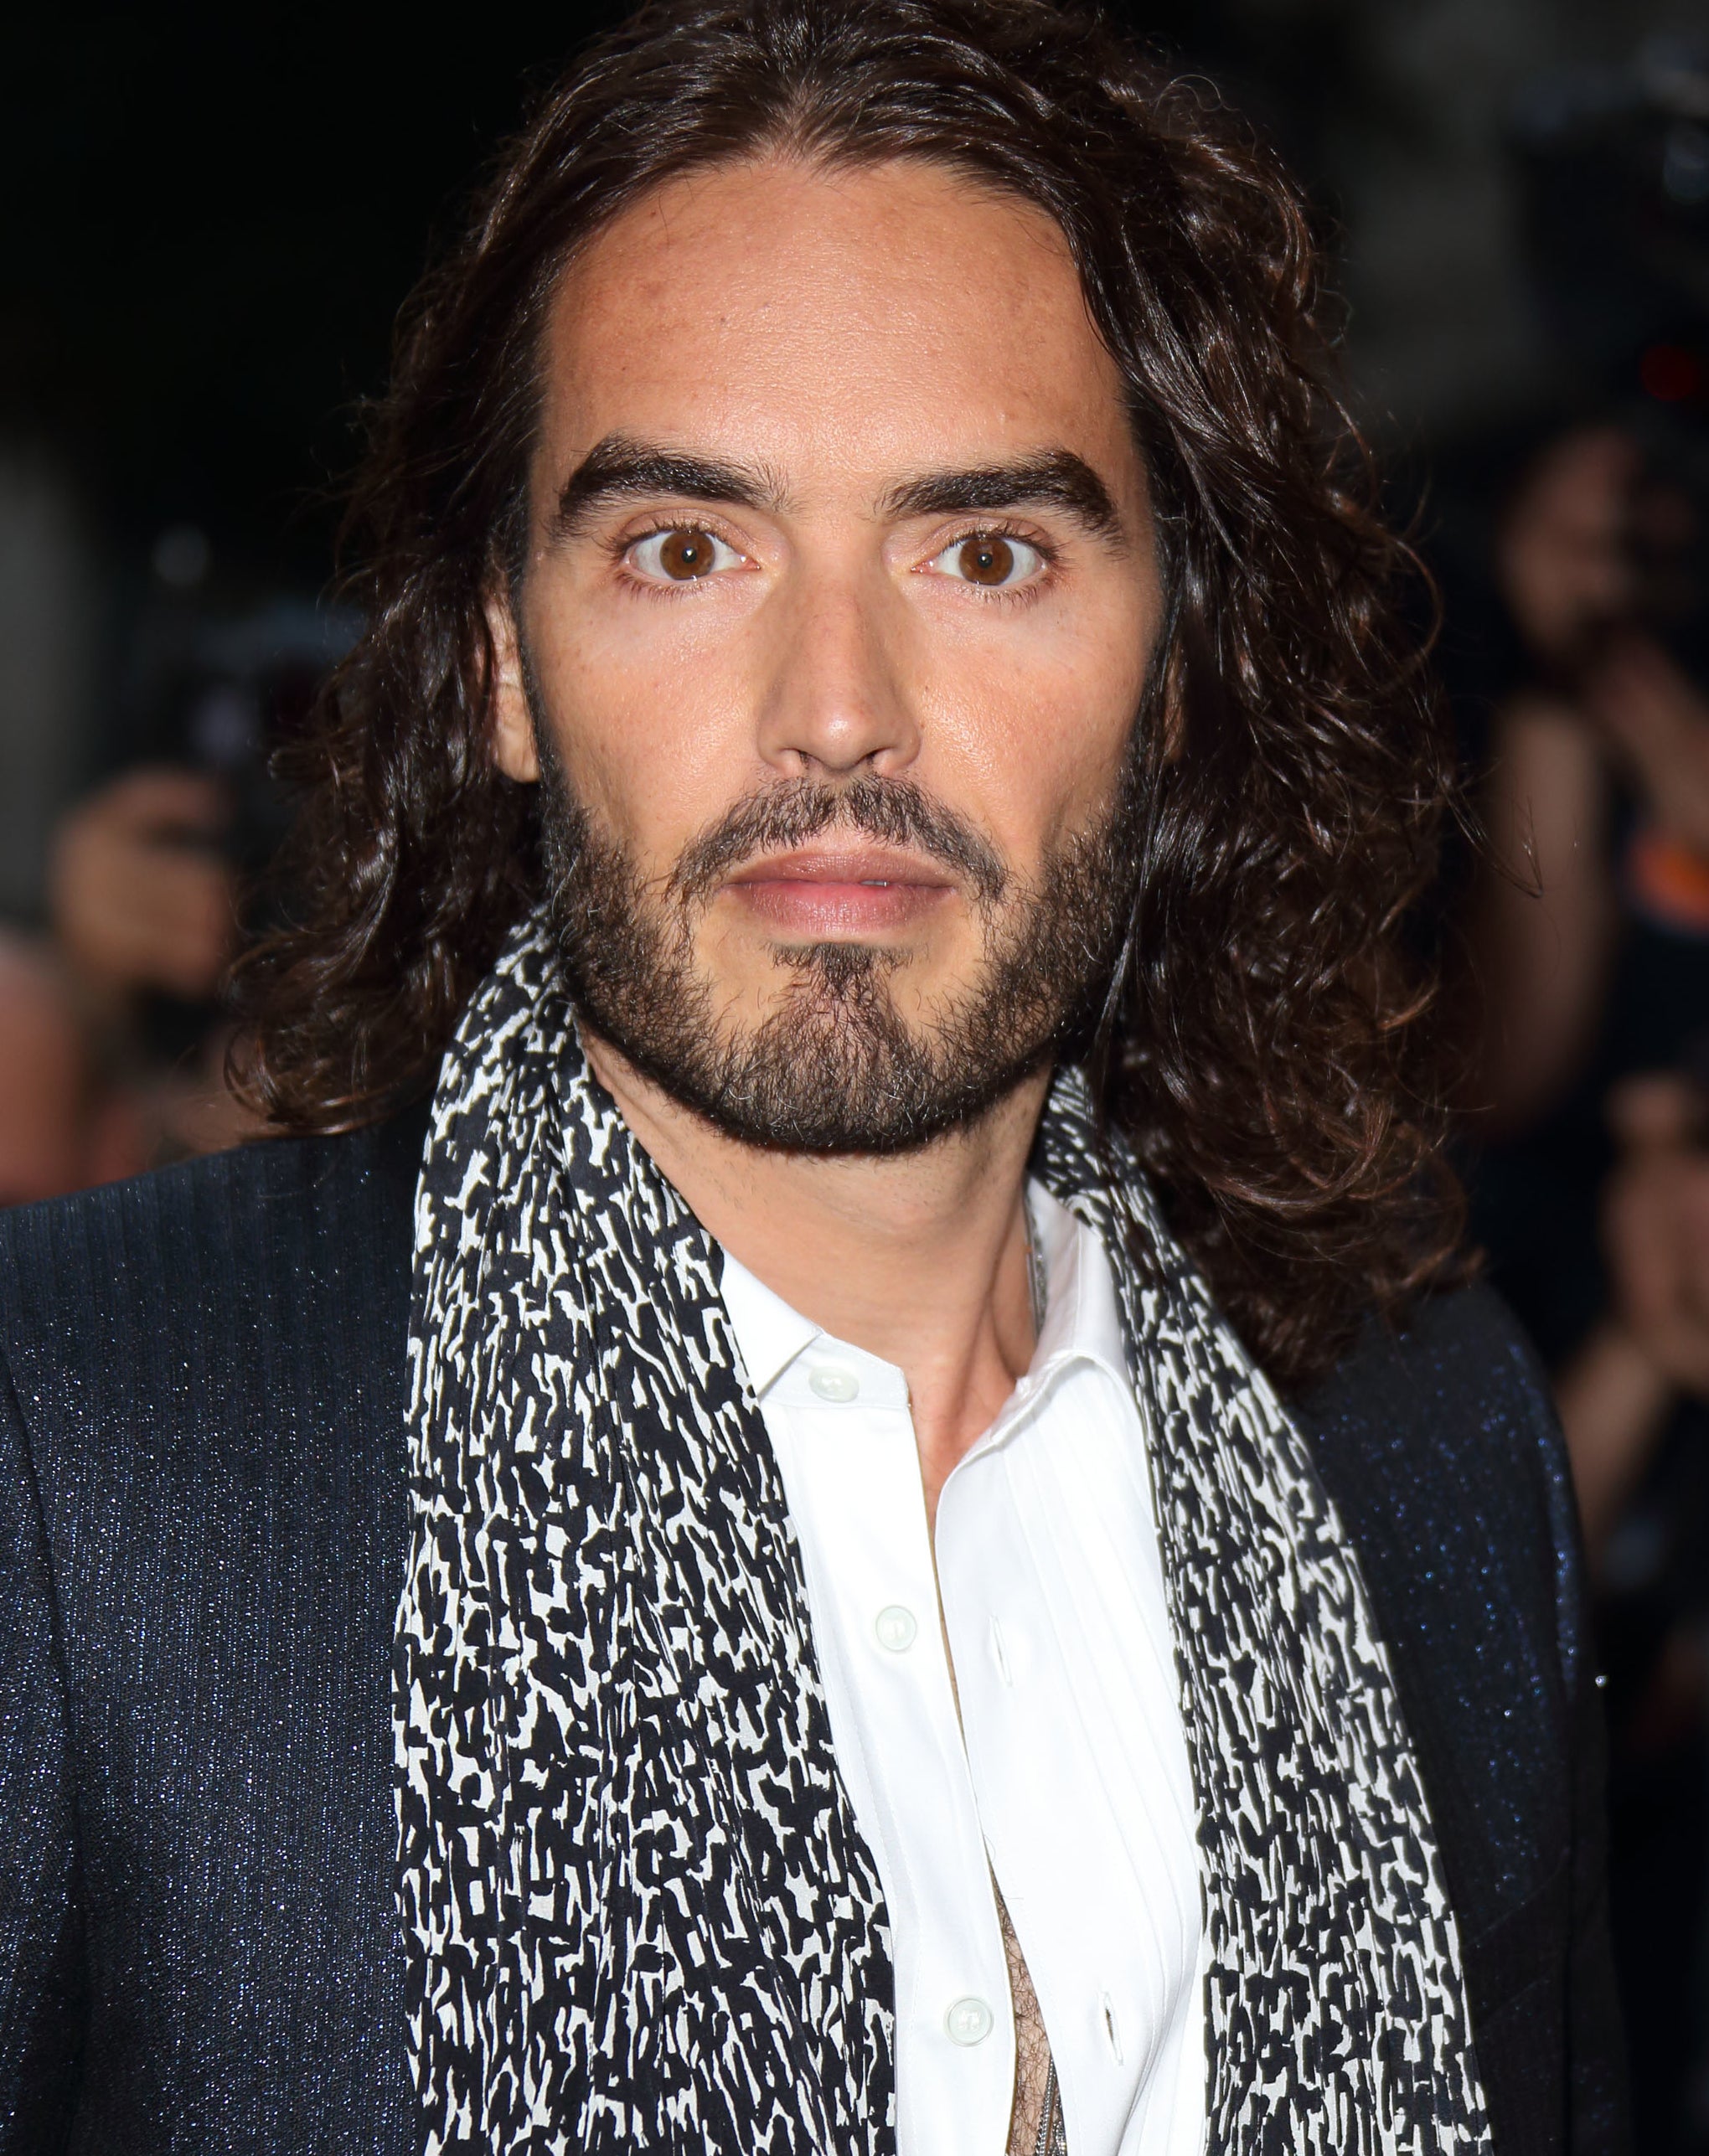 Russell Brand Joked About Raping And Killing A Woman In 2013